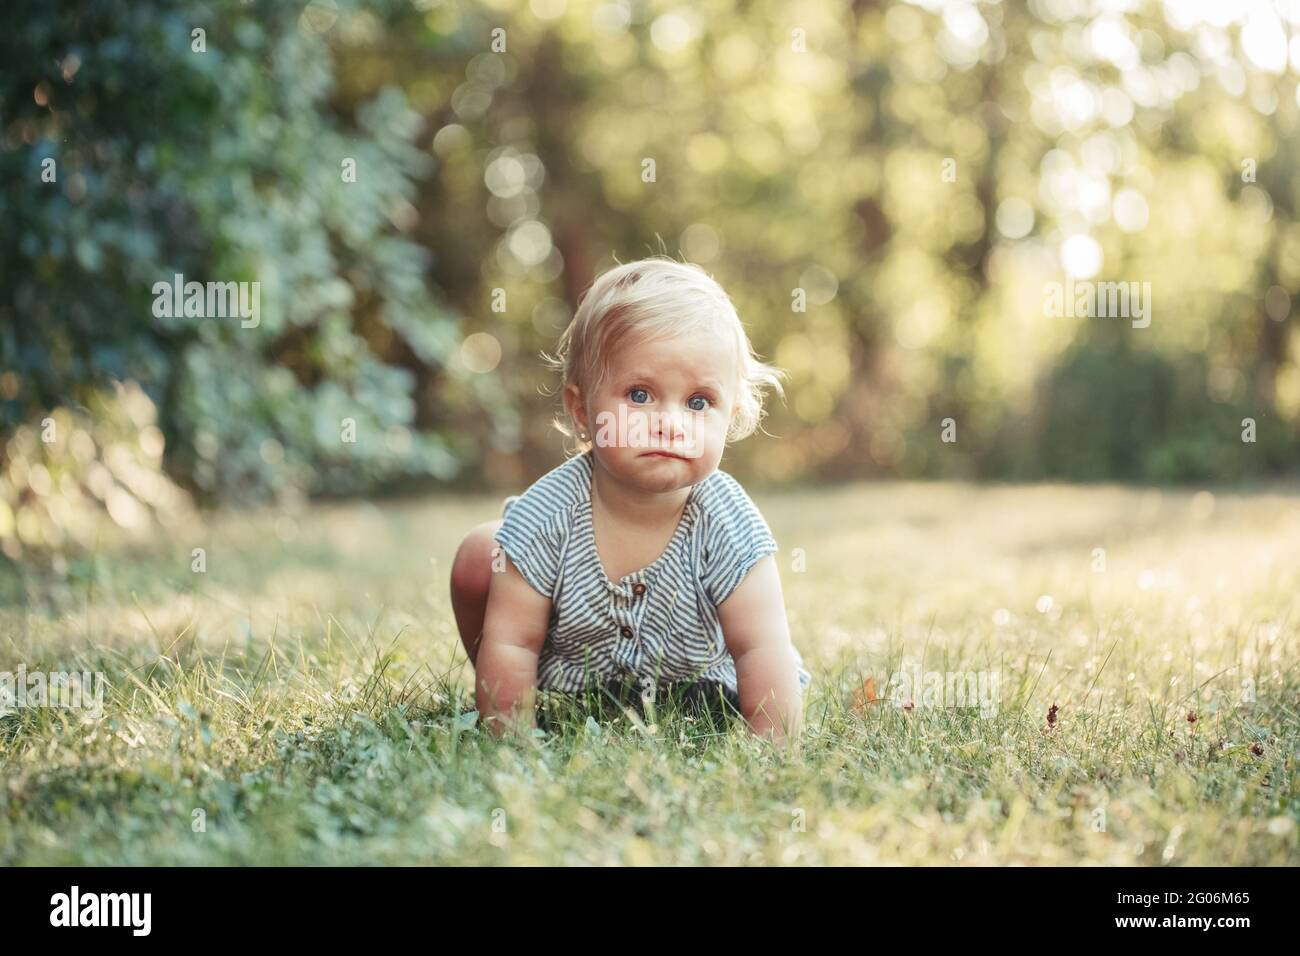 Cute baby girl crawling on ground in park outdoors. Adorable child toddler learning to walk outside. Healthy physical development. Funny surprised Stock Photo